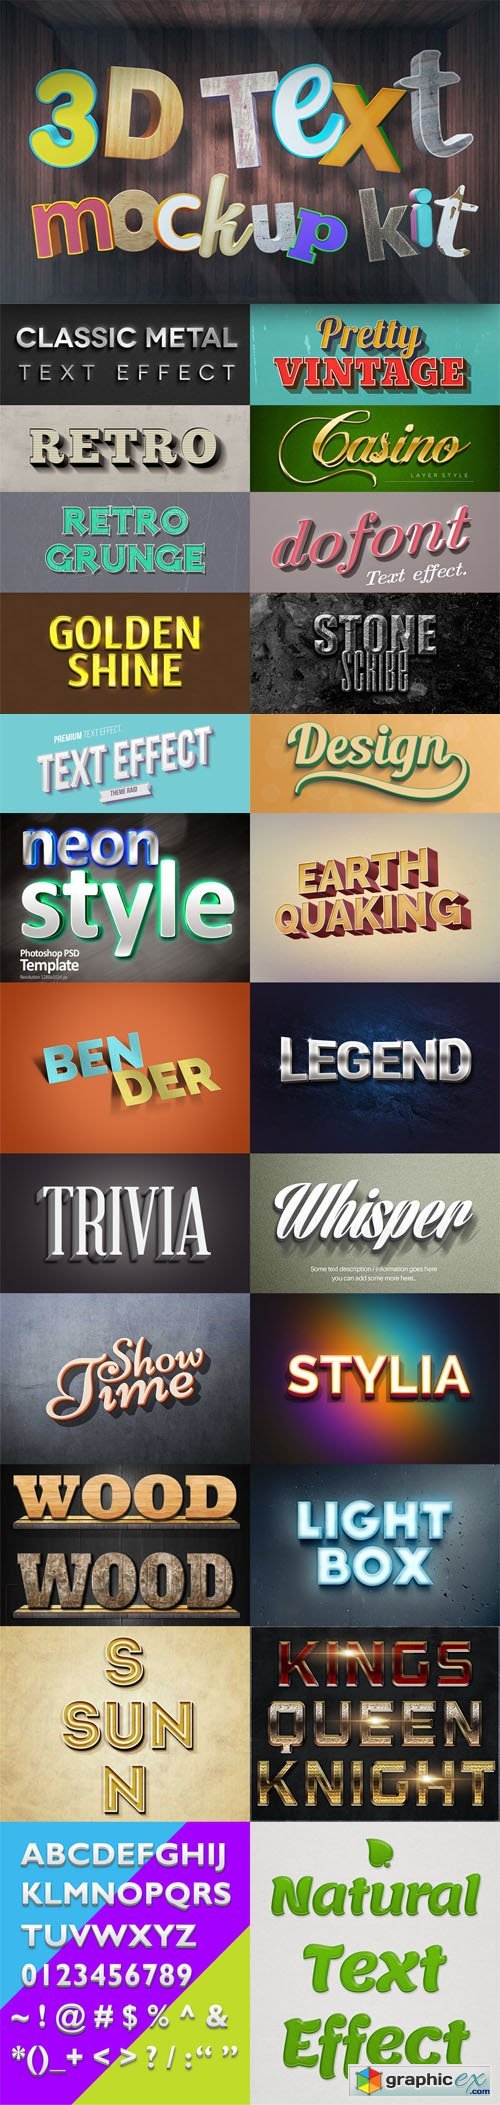 22 Photoshop Text Effects to Create Easy Text Styles